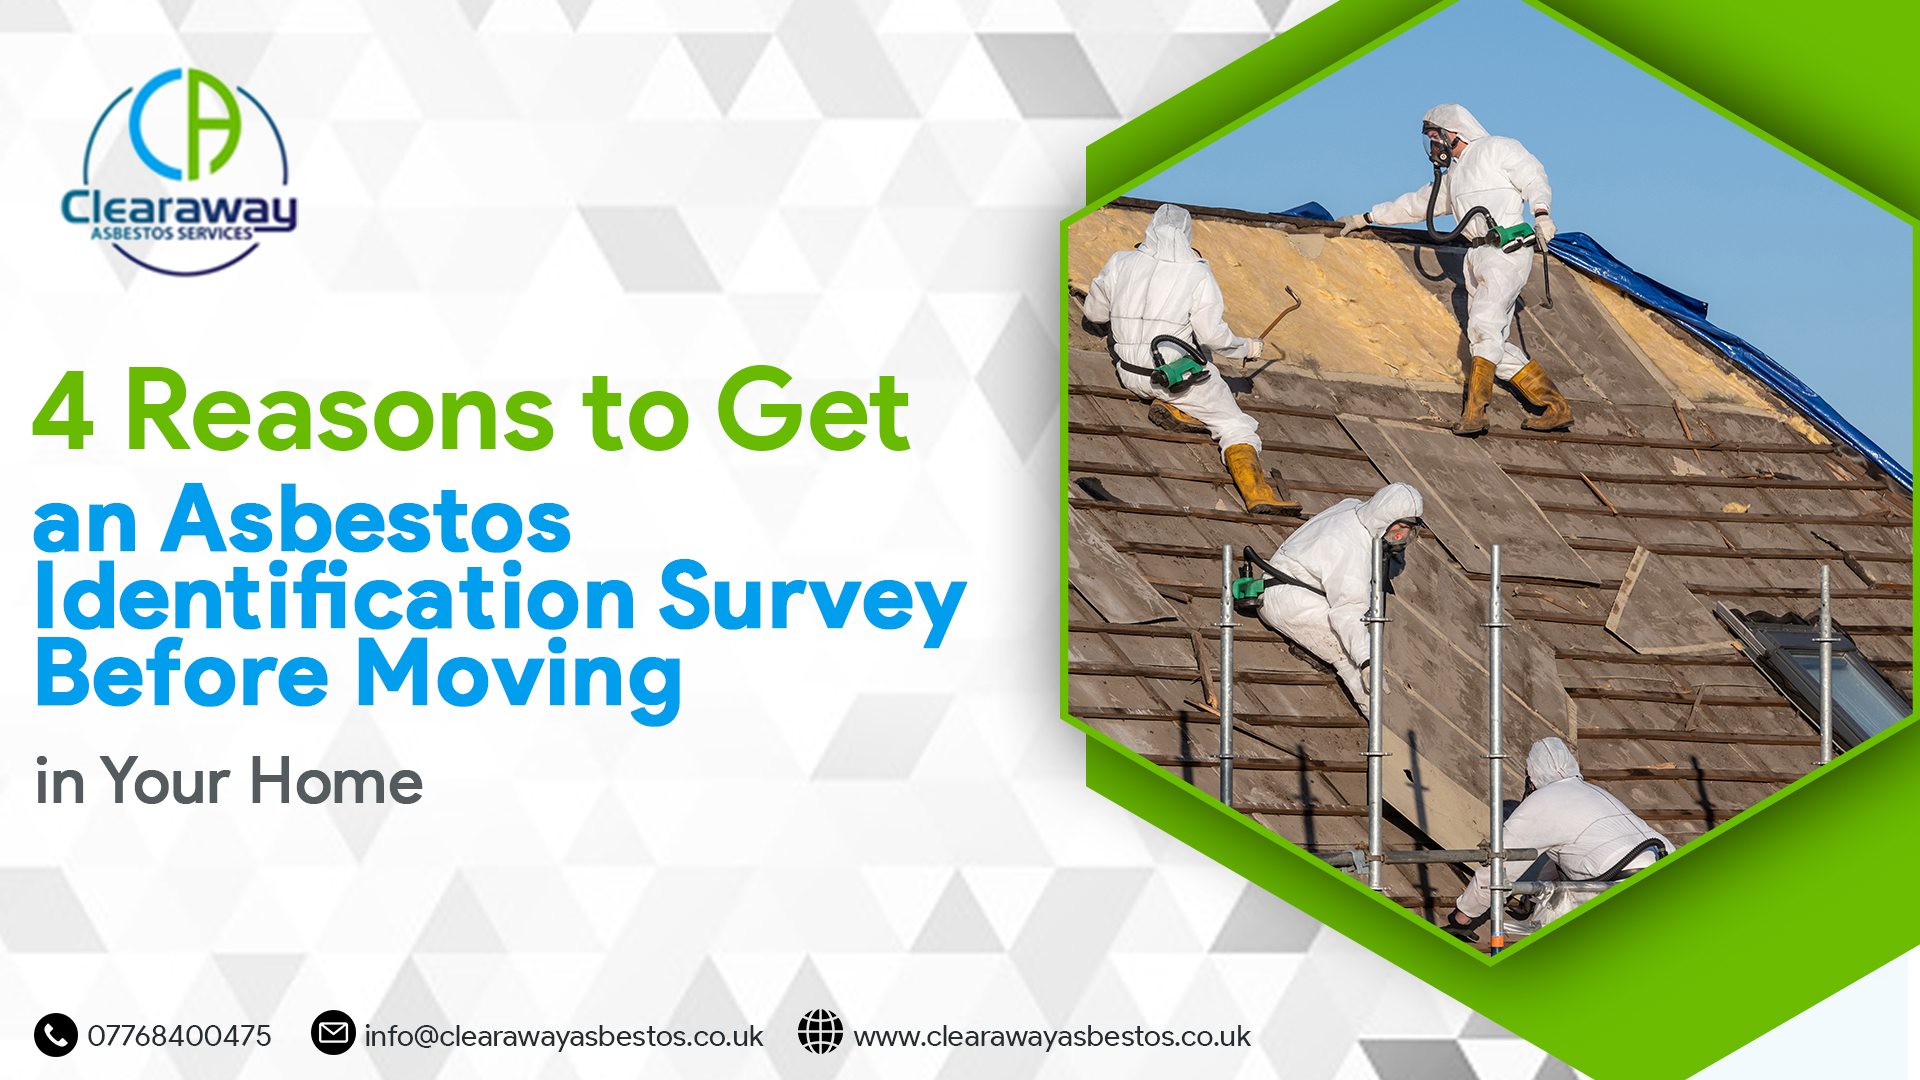 4 Reasons to Get an Asbestos Identification Survey Before Moving to a New House